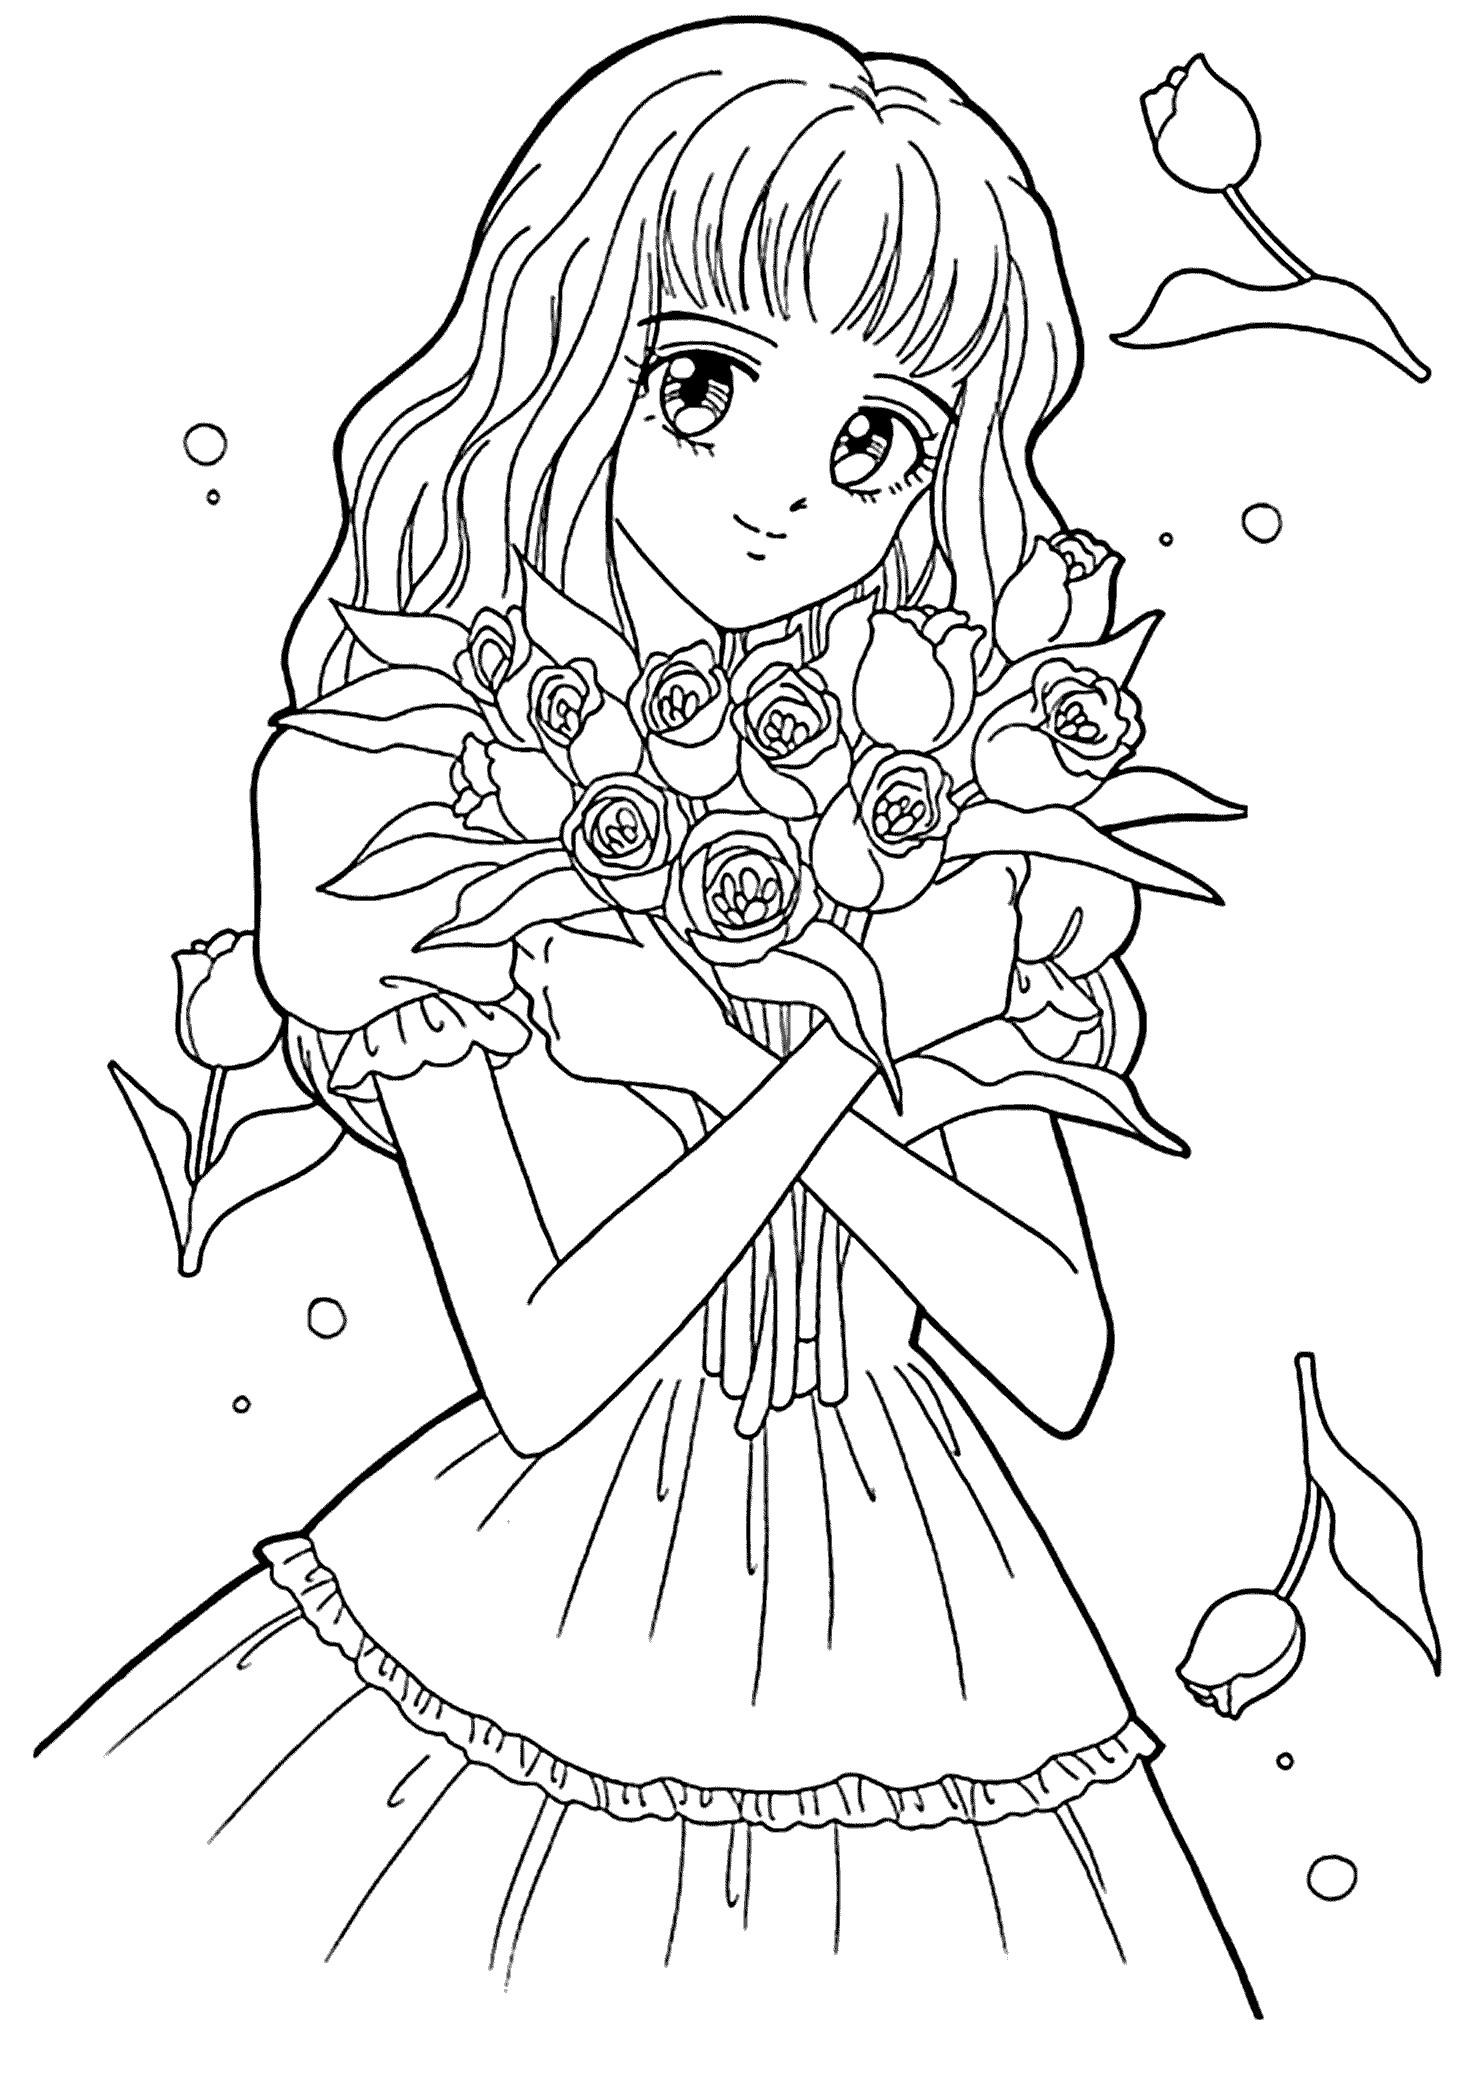 Coloring Sheets For Girls
 Best Free Printable Coloring Pages for Kids and Teens